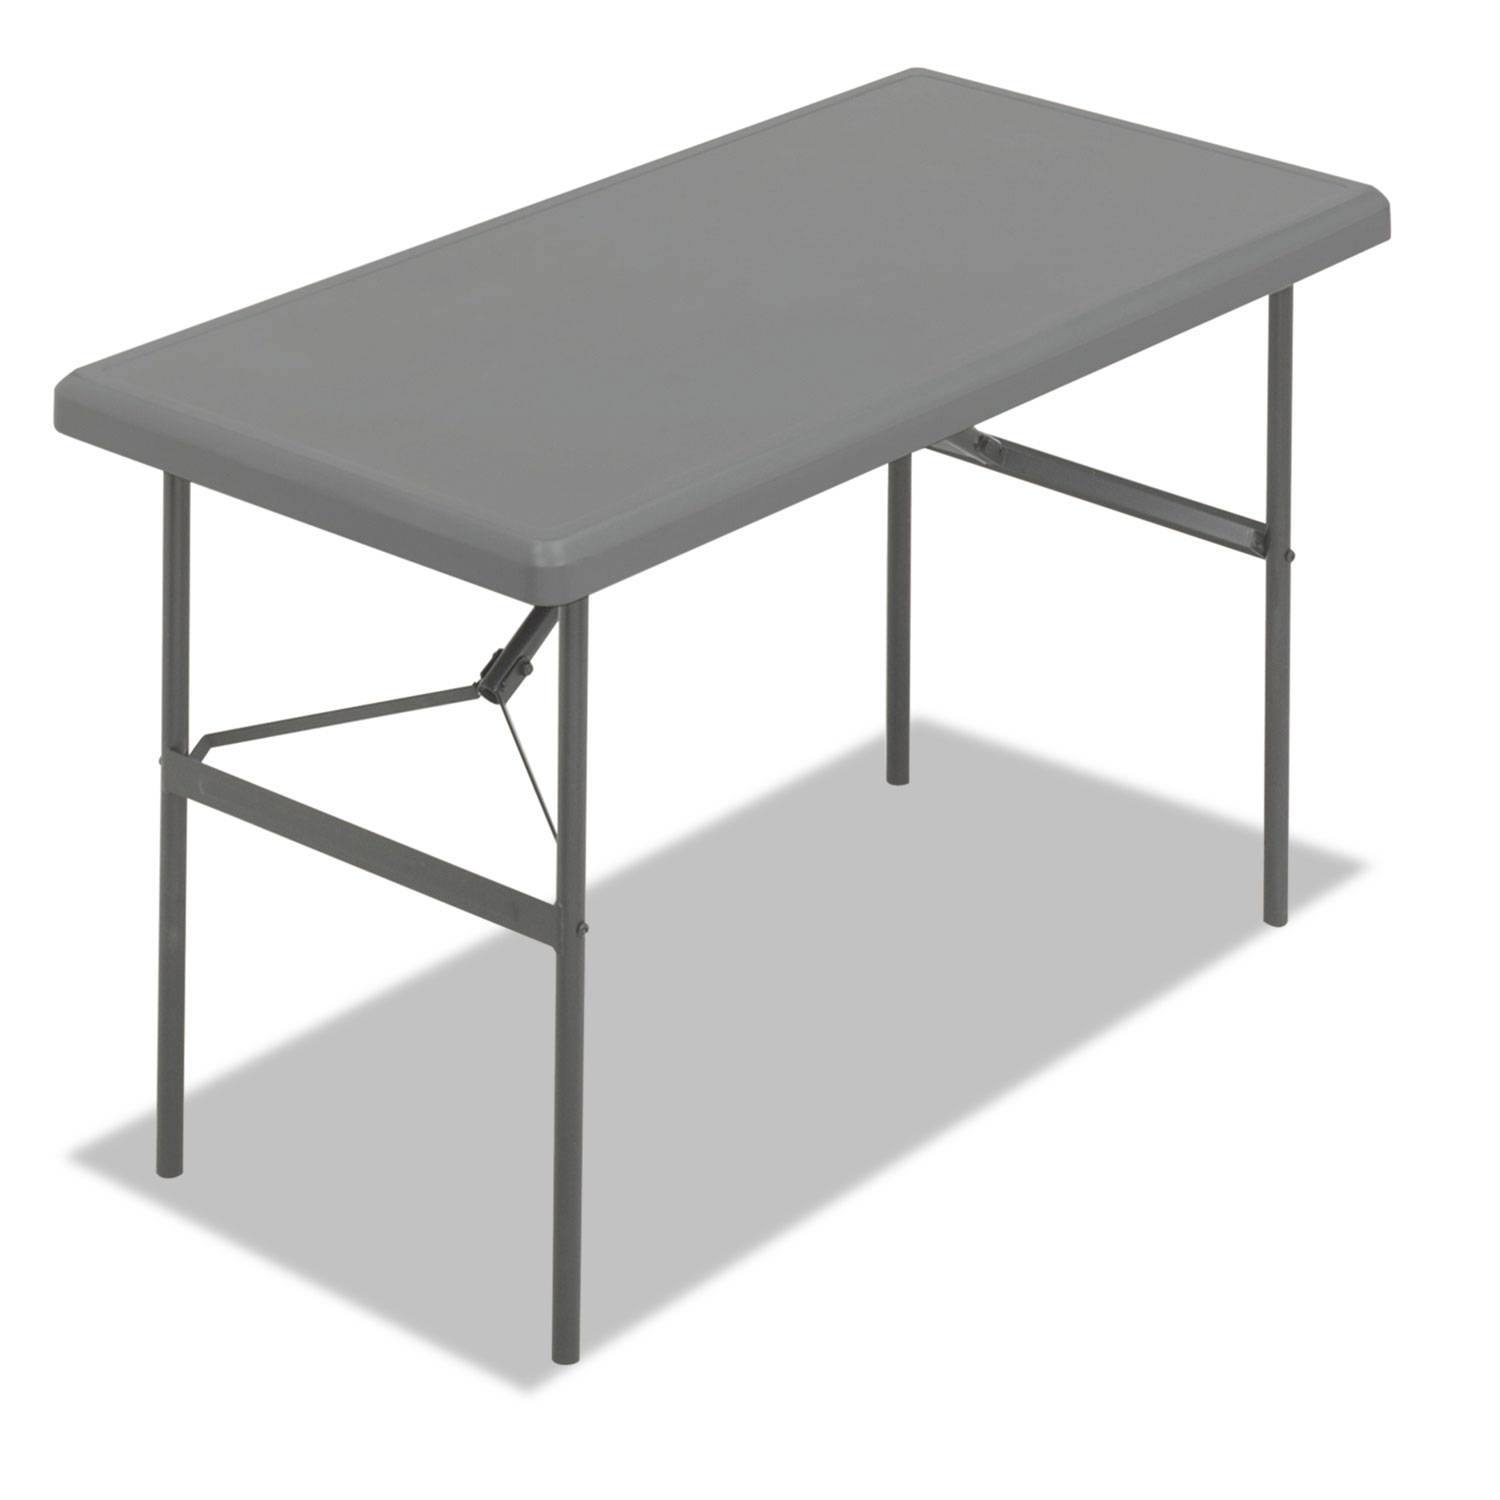  Iceberg 65207 IndestrucTables Too 1200 Series Folding Table, 48w x 24d x 29h, Charcoal (ICE65207) 